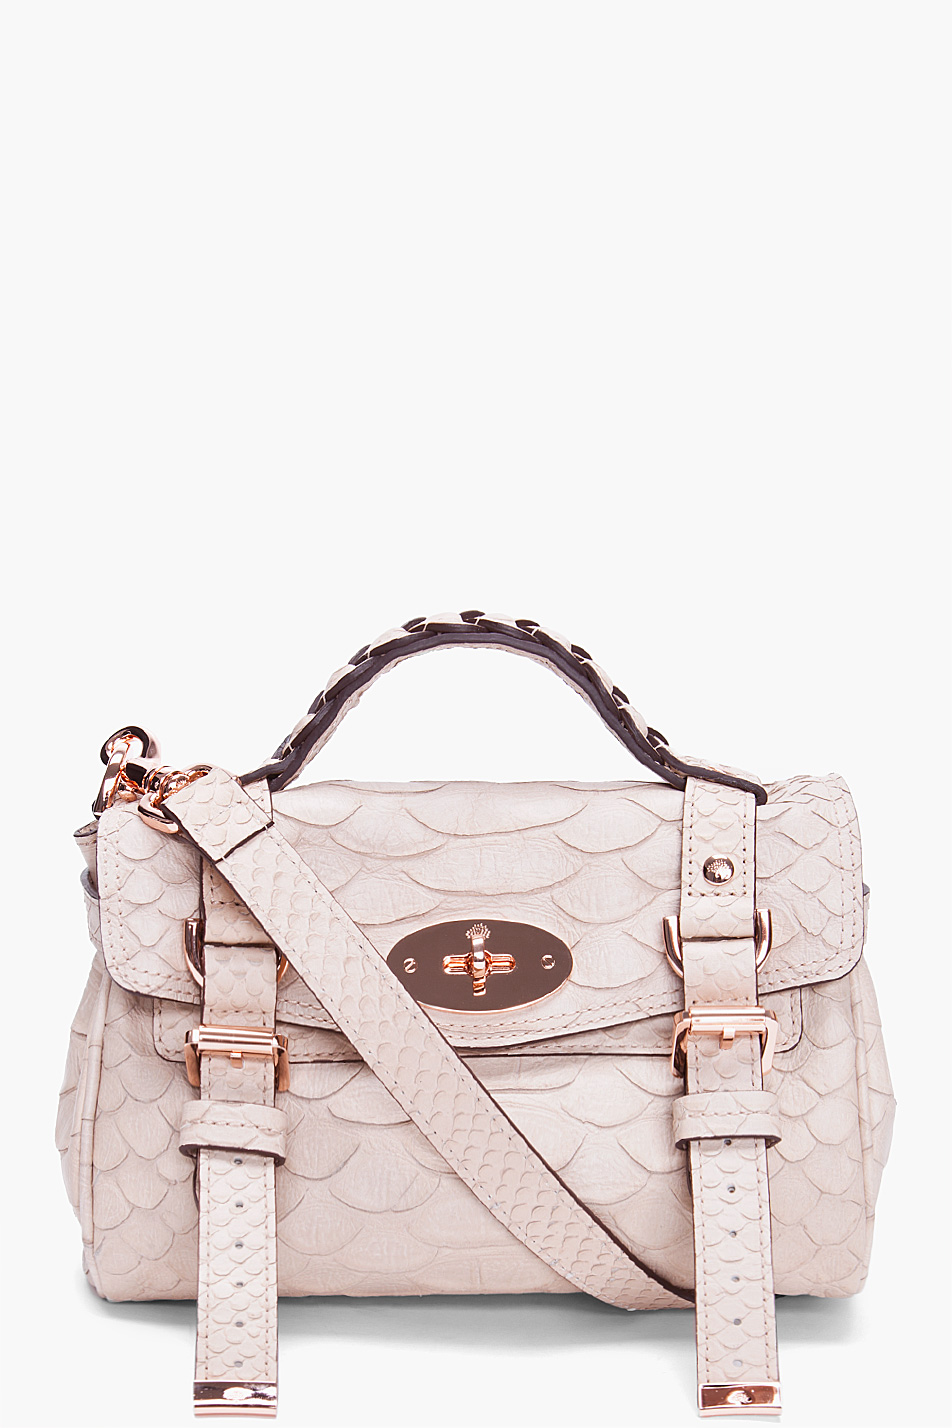 Mulberry Pale Pink Mini Alexa Bag in Pink | Lyst